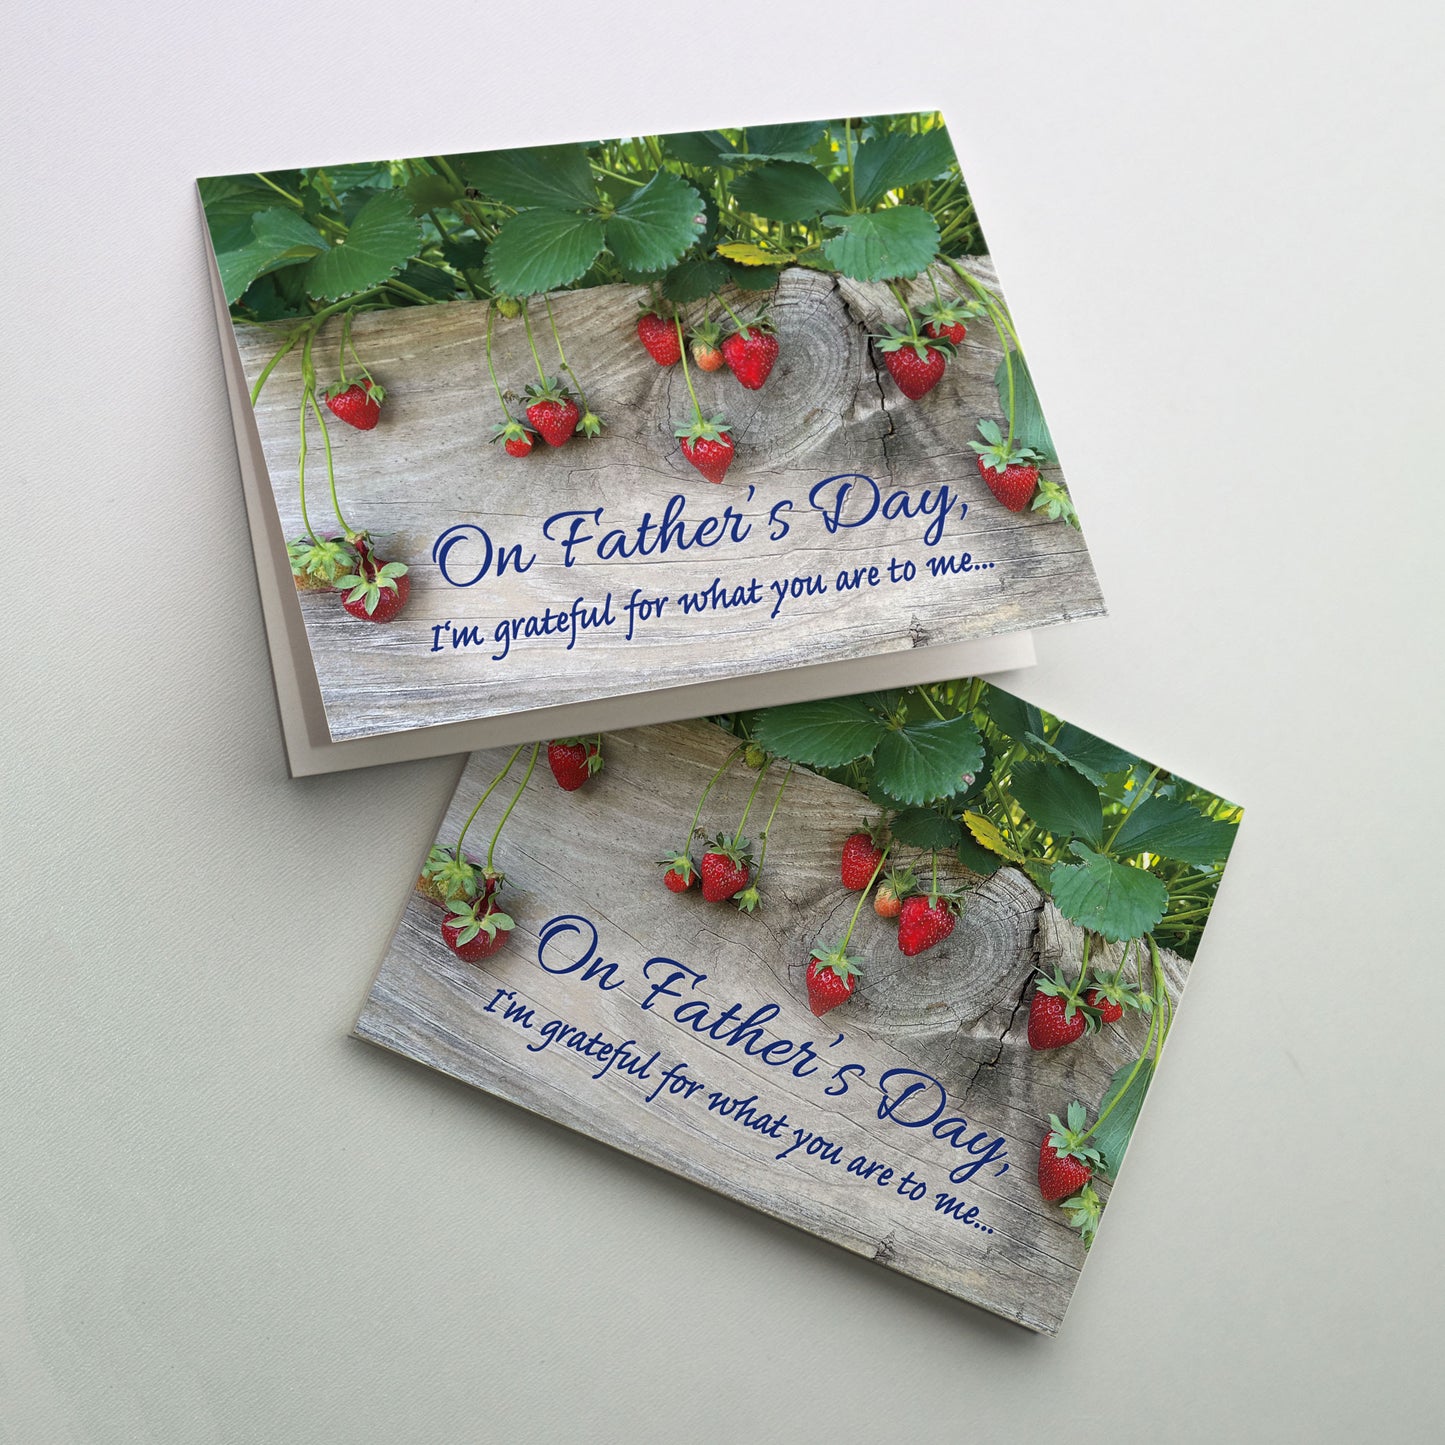 On Father's Day I'm Grateful - Father's Day Card